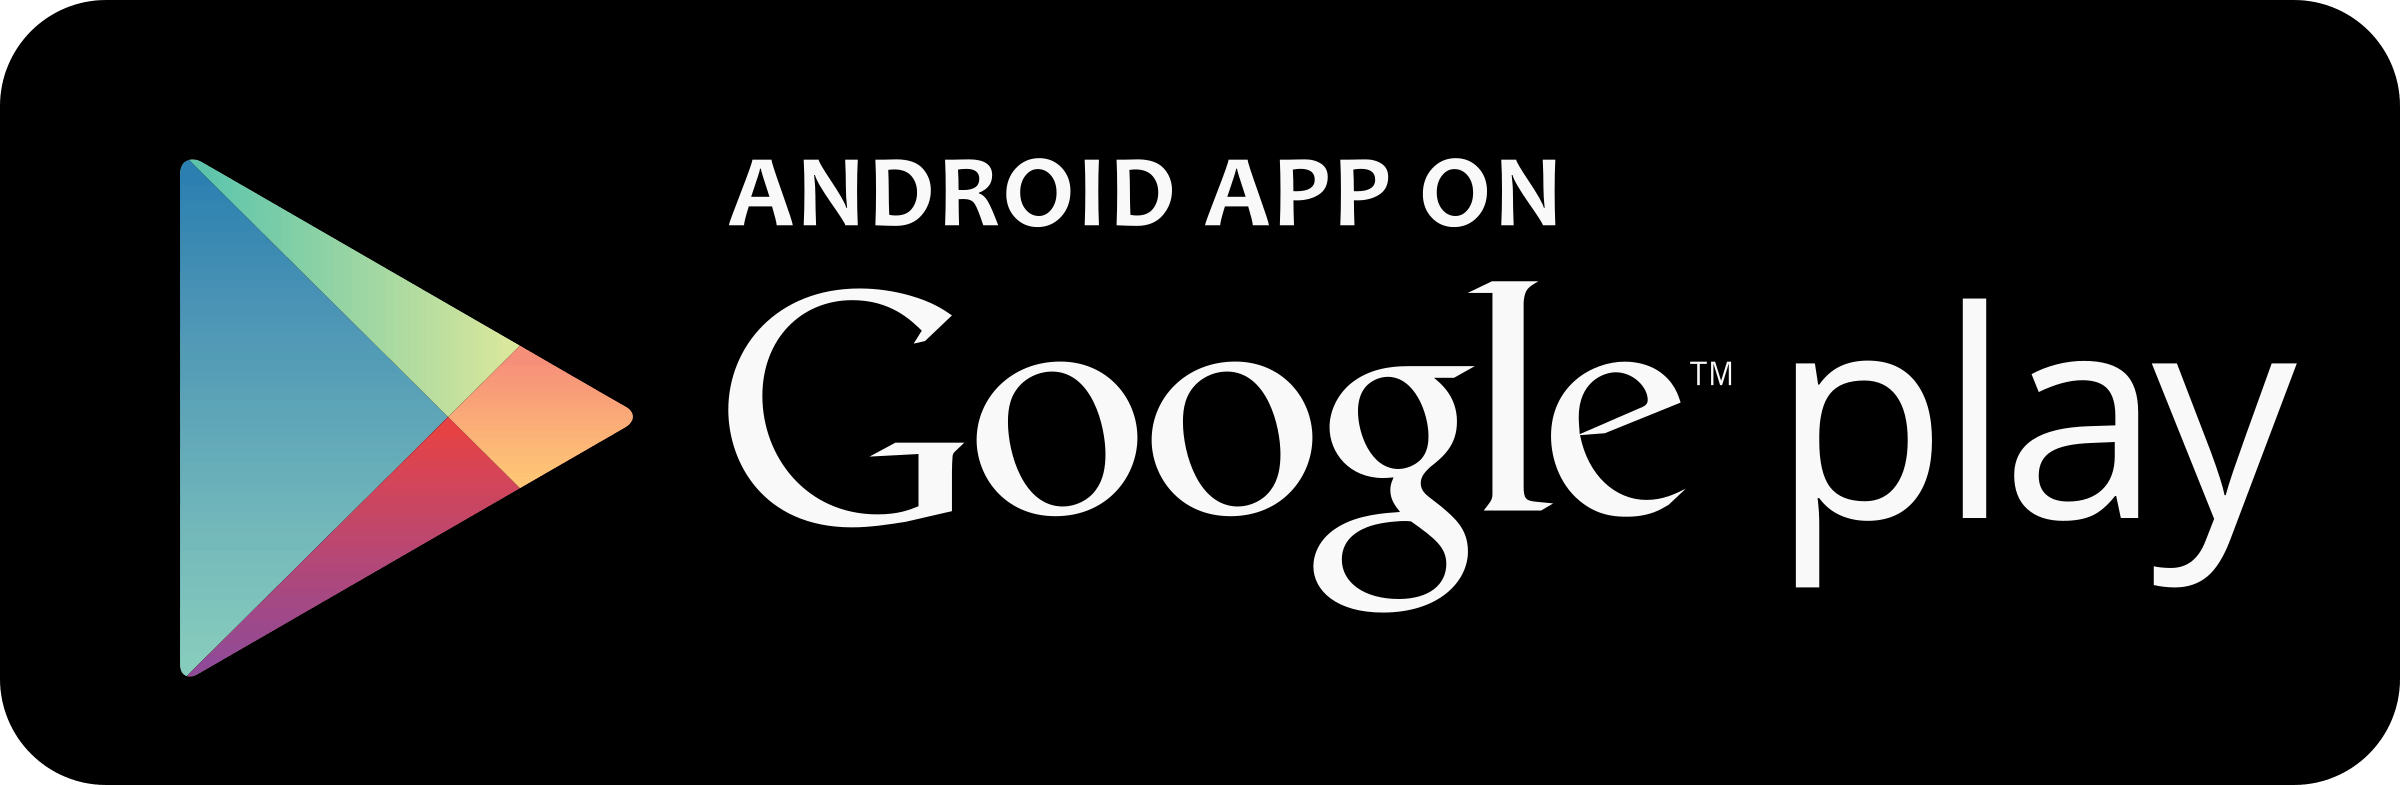 Android- App Logo - Google Play download Android app Logo PNG Transparent & SVG Vector